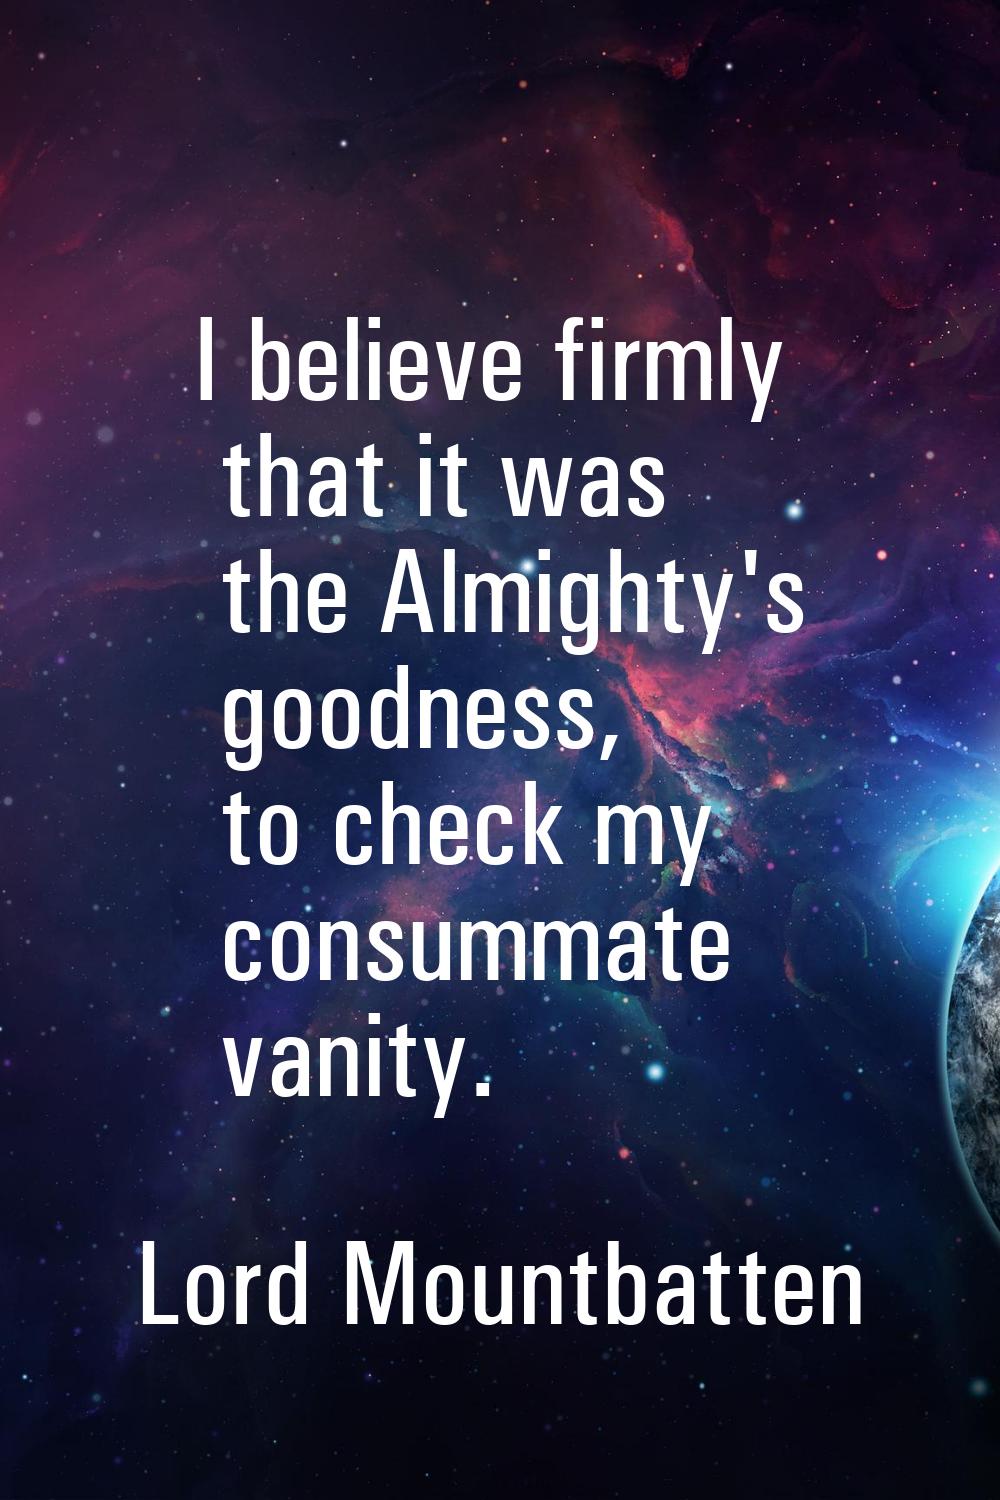 I believe firmly that it was the Almighty's goodness, to check my consummate vanity.